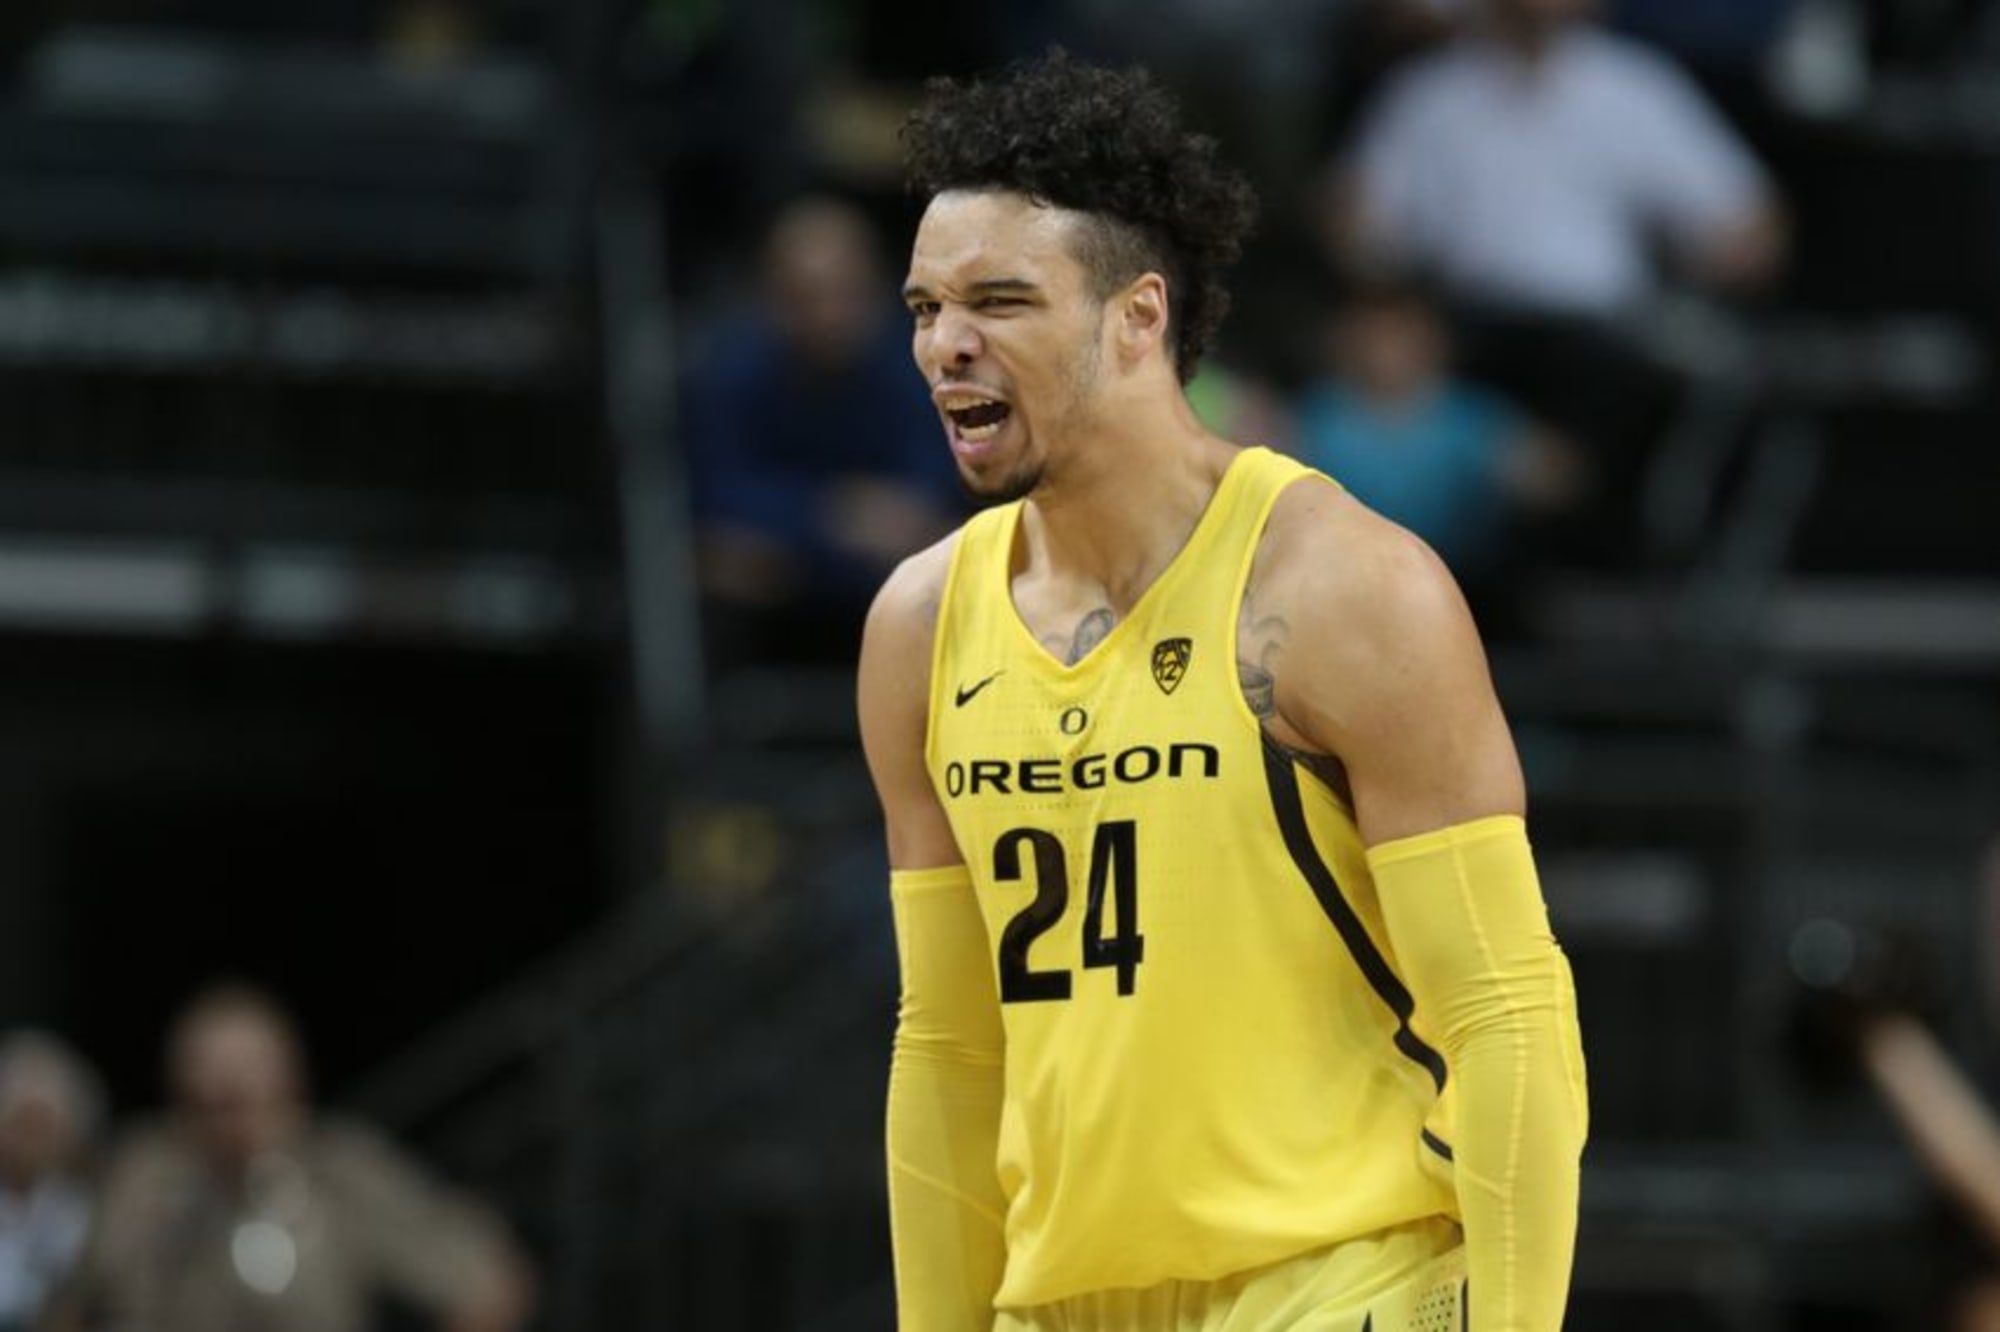 Should DIllon Brooks Be Suspended For His Actiions vs Washington State